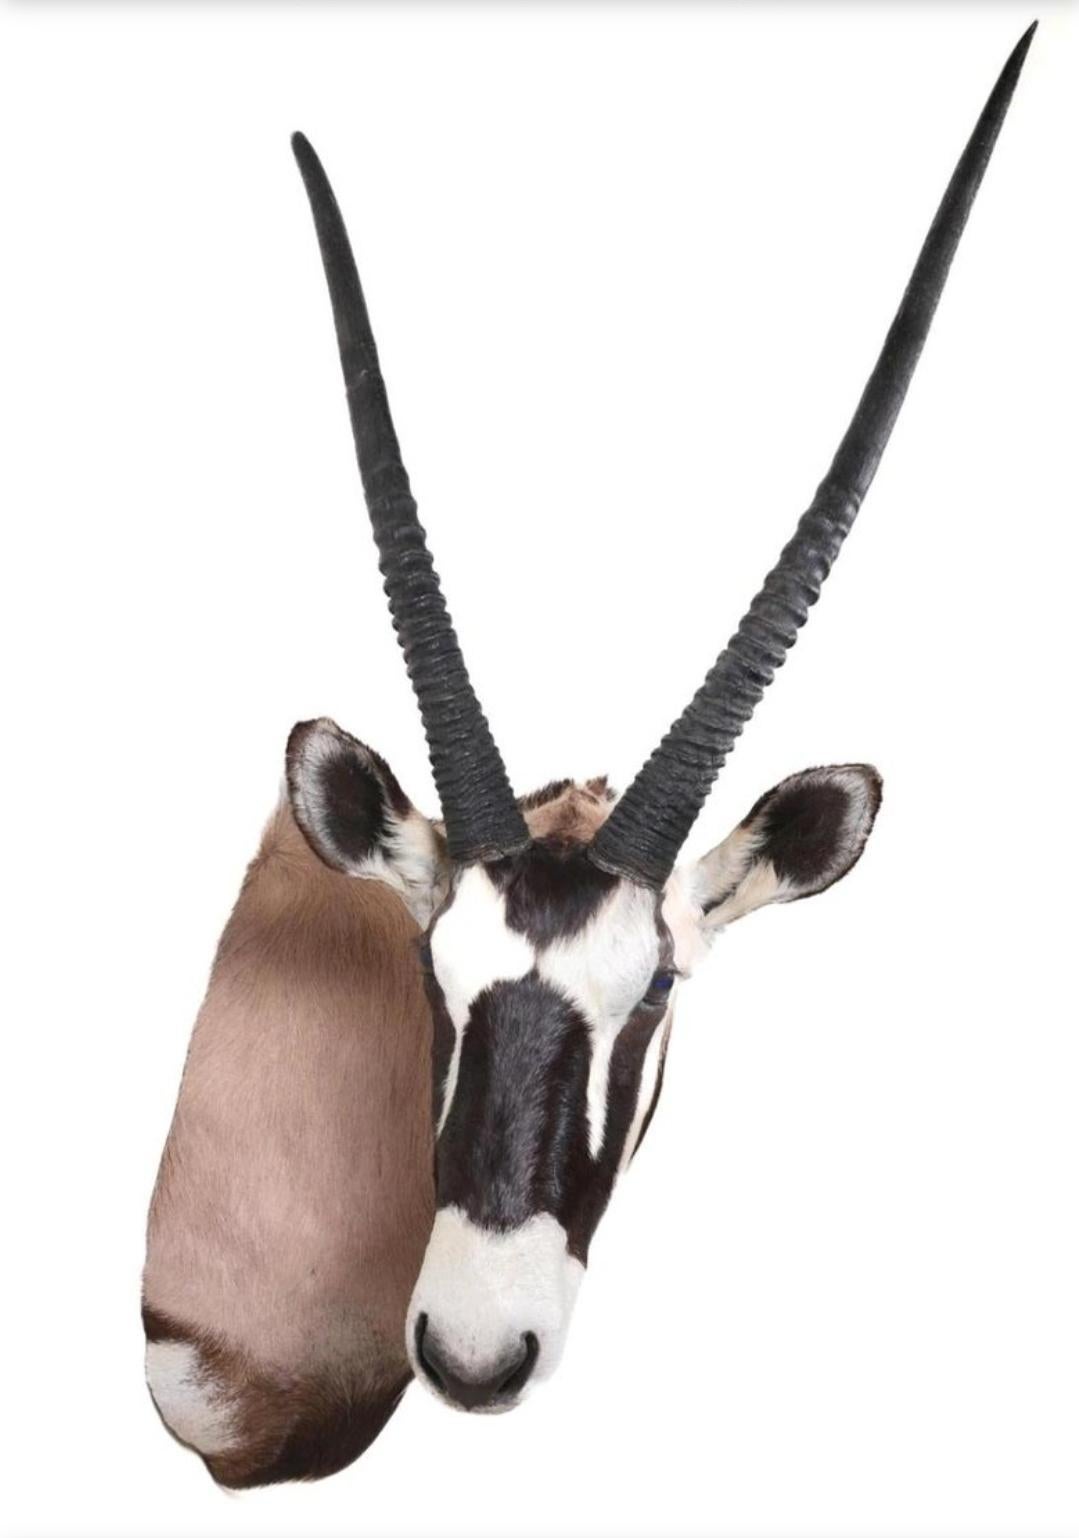 This is a great African Gemsbok taxidermy shoulder mount. It is posed with the head in a semi-upright position looking to the animal's right side. This a elegant example of a mount of this creature.
The gemsbok is a heavy-built antelope species that